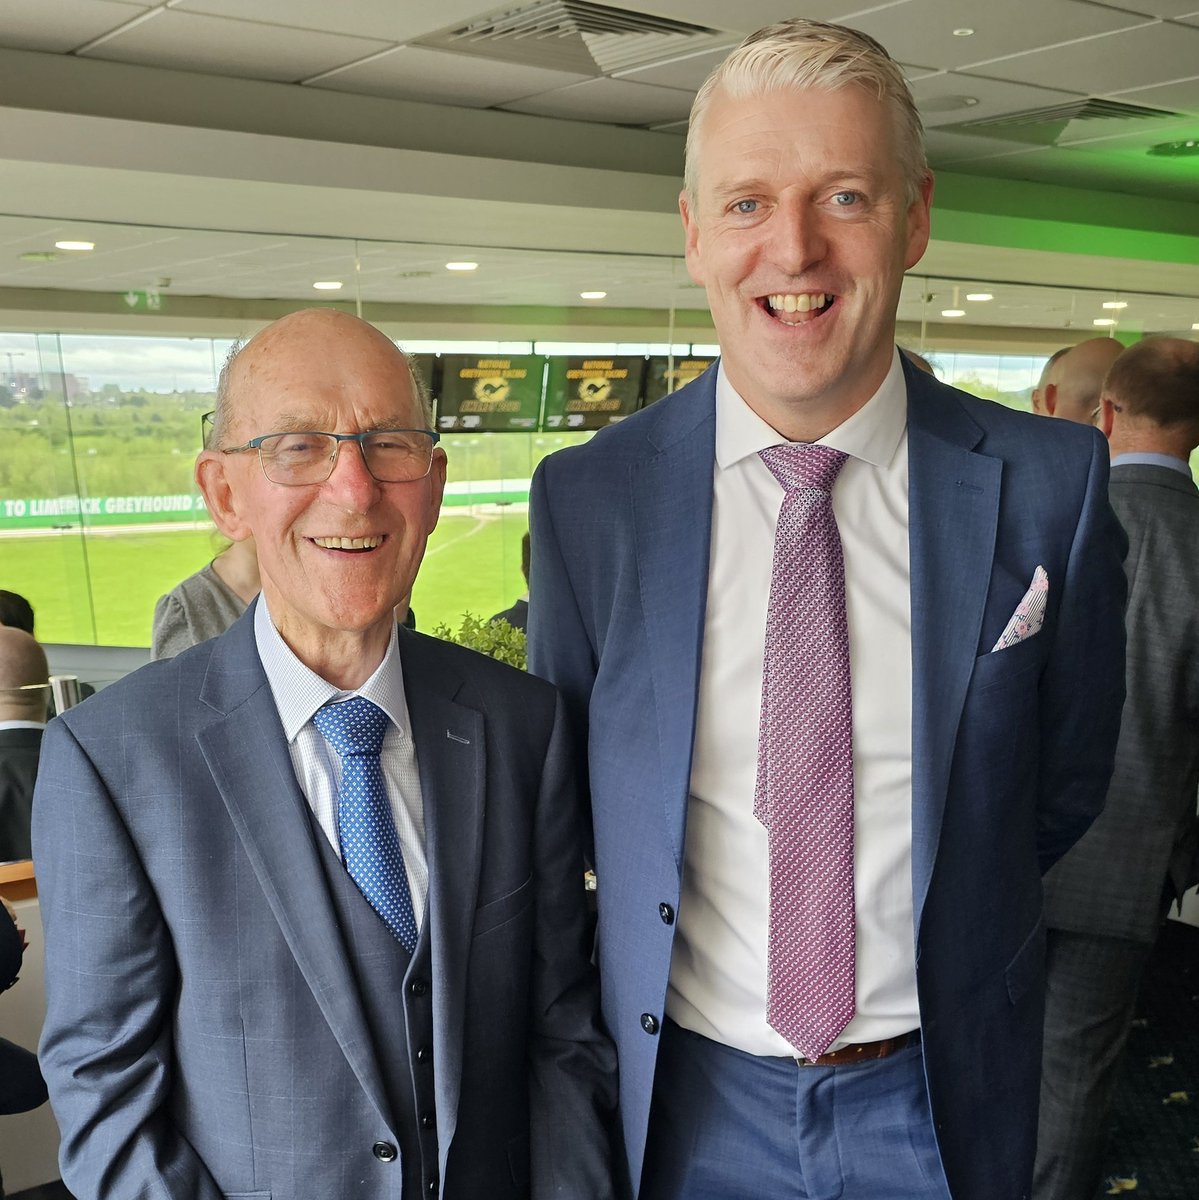 Finbarr Coleman is being celebrated for his contribution to our sport tonight with the Special Merit Award.

He's pictured with Brian Collins who took the reins from Finbarr when he retired

#GreyhoundAwards #GoGreyhoundRacing #ThisRunsDeep @CorkDogs @YglGreyhound